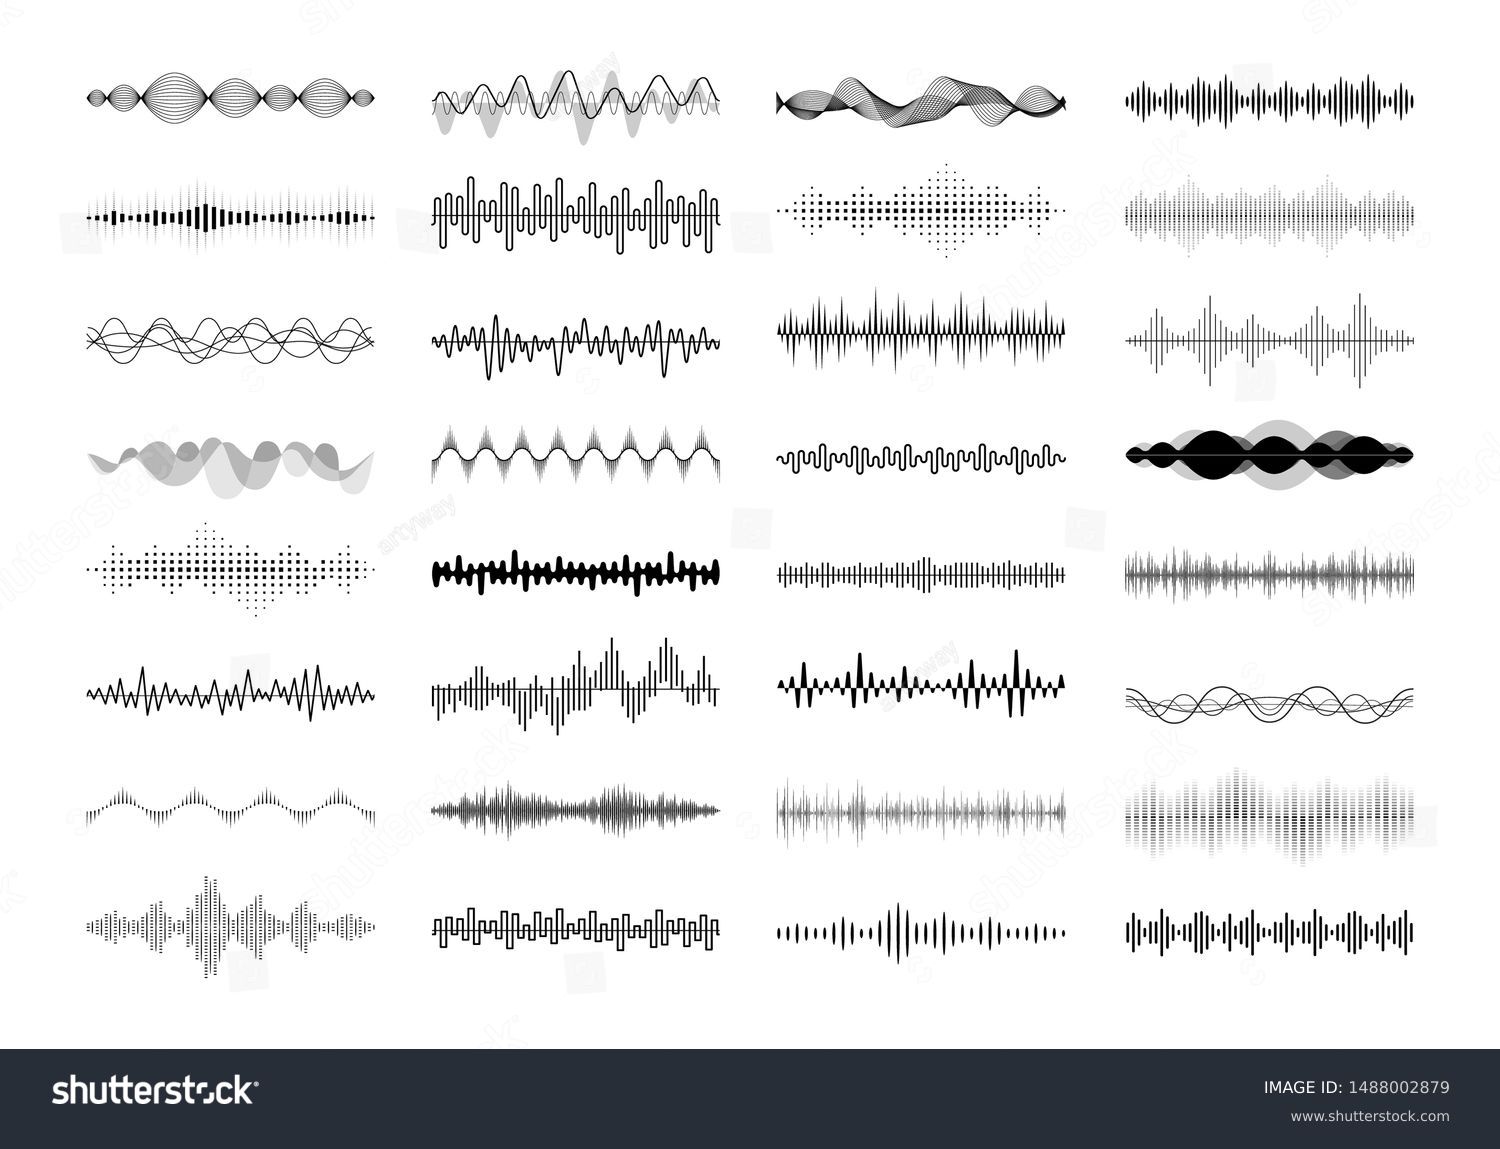 Set of waving, vibration and pulsing lines. Graphic design elements for financial monitoring, medical equipment, music app. Isolated vector illustration. #1488002879